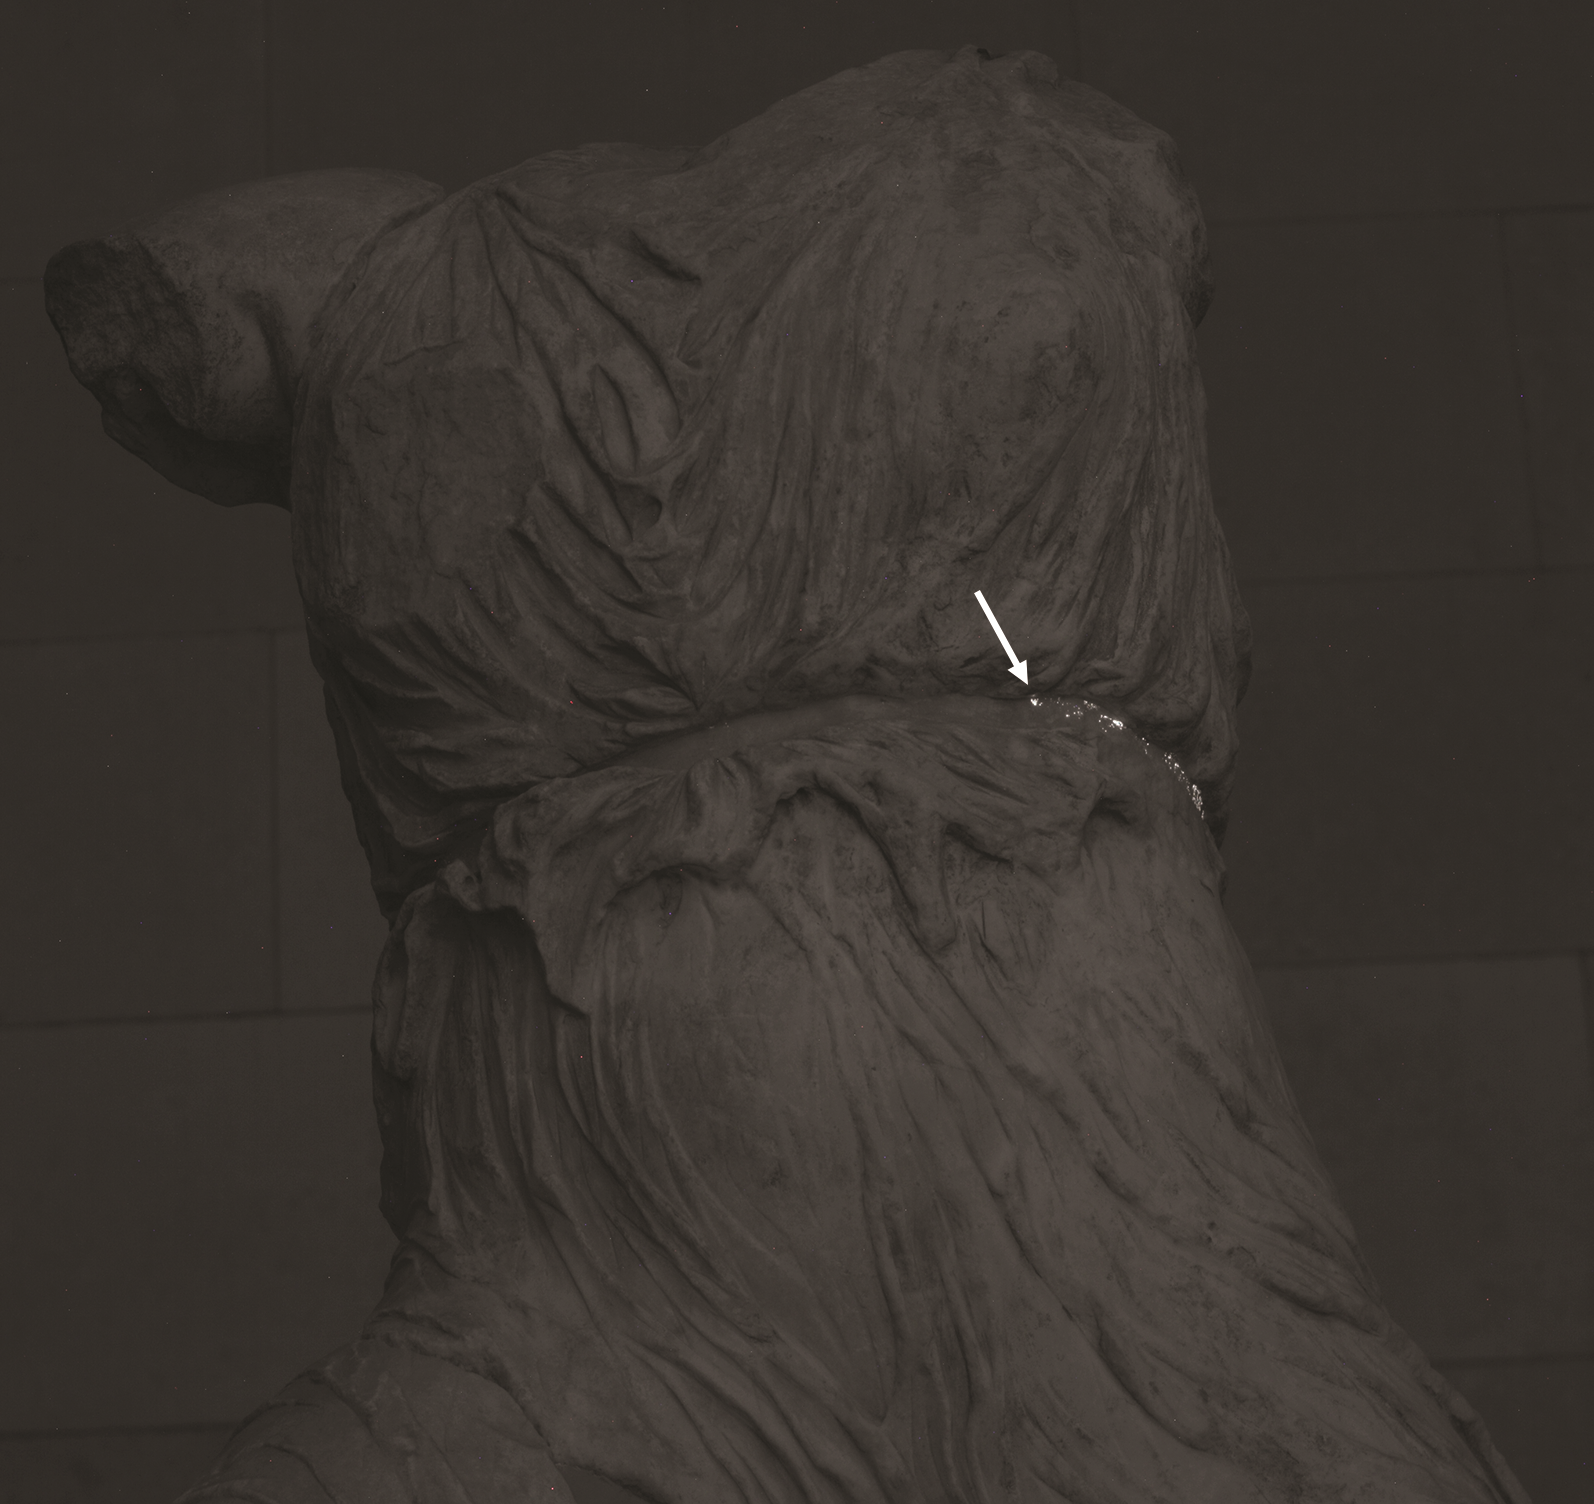 headless, armless statue in sepia tone with bright white spots and an arrow showing where samples were taken